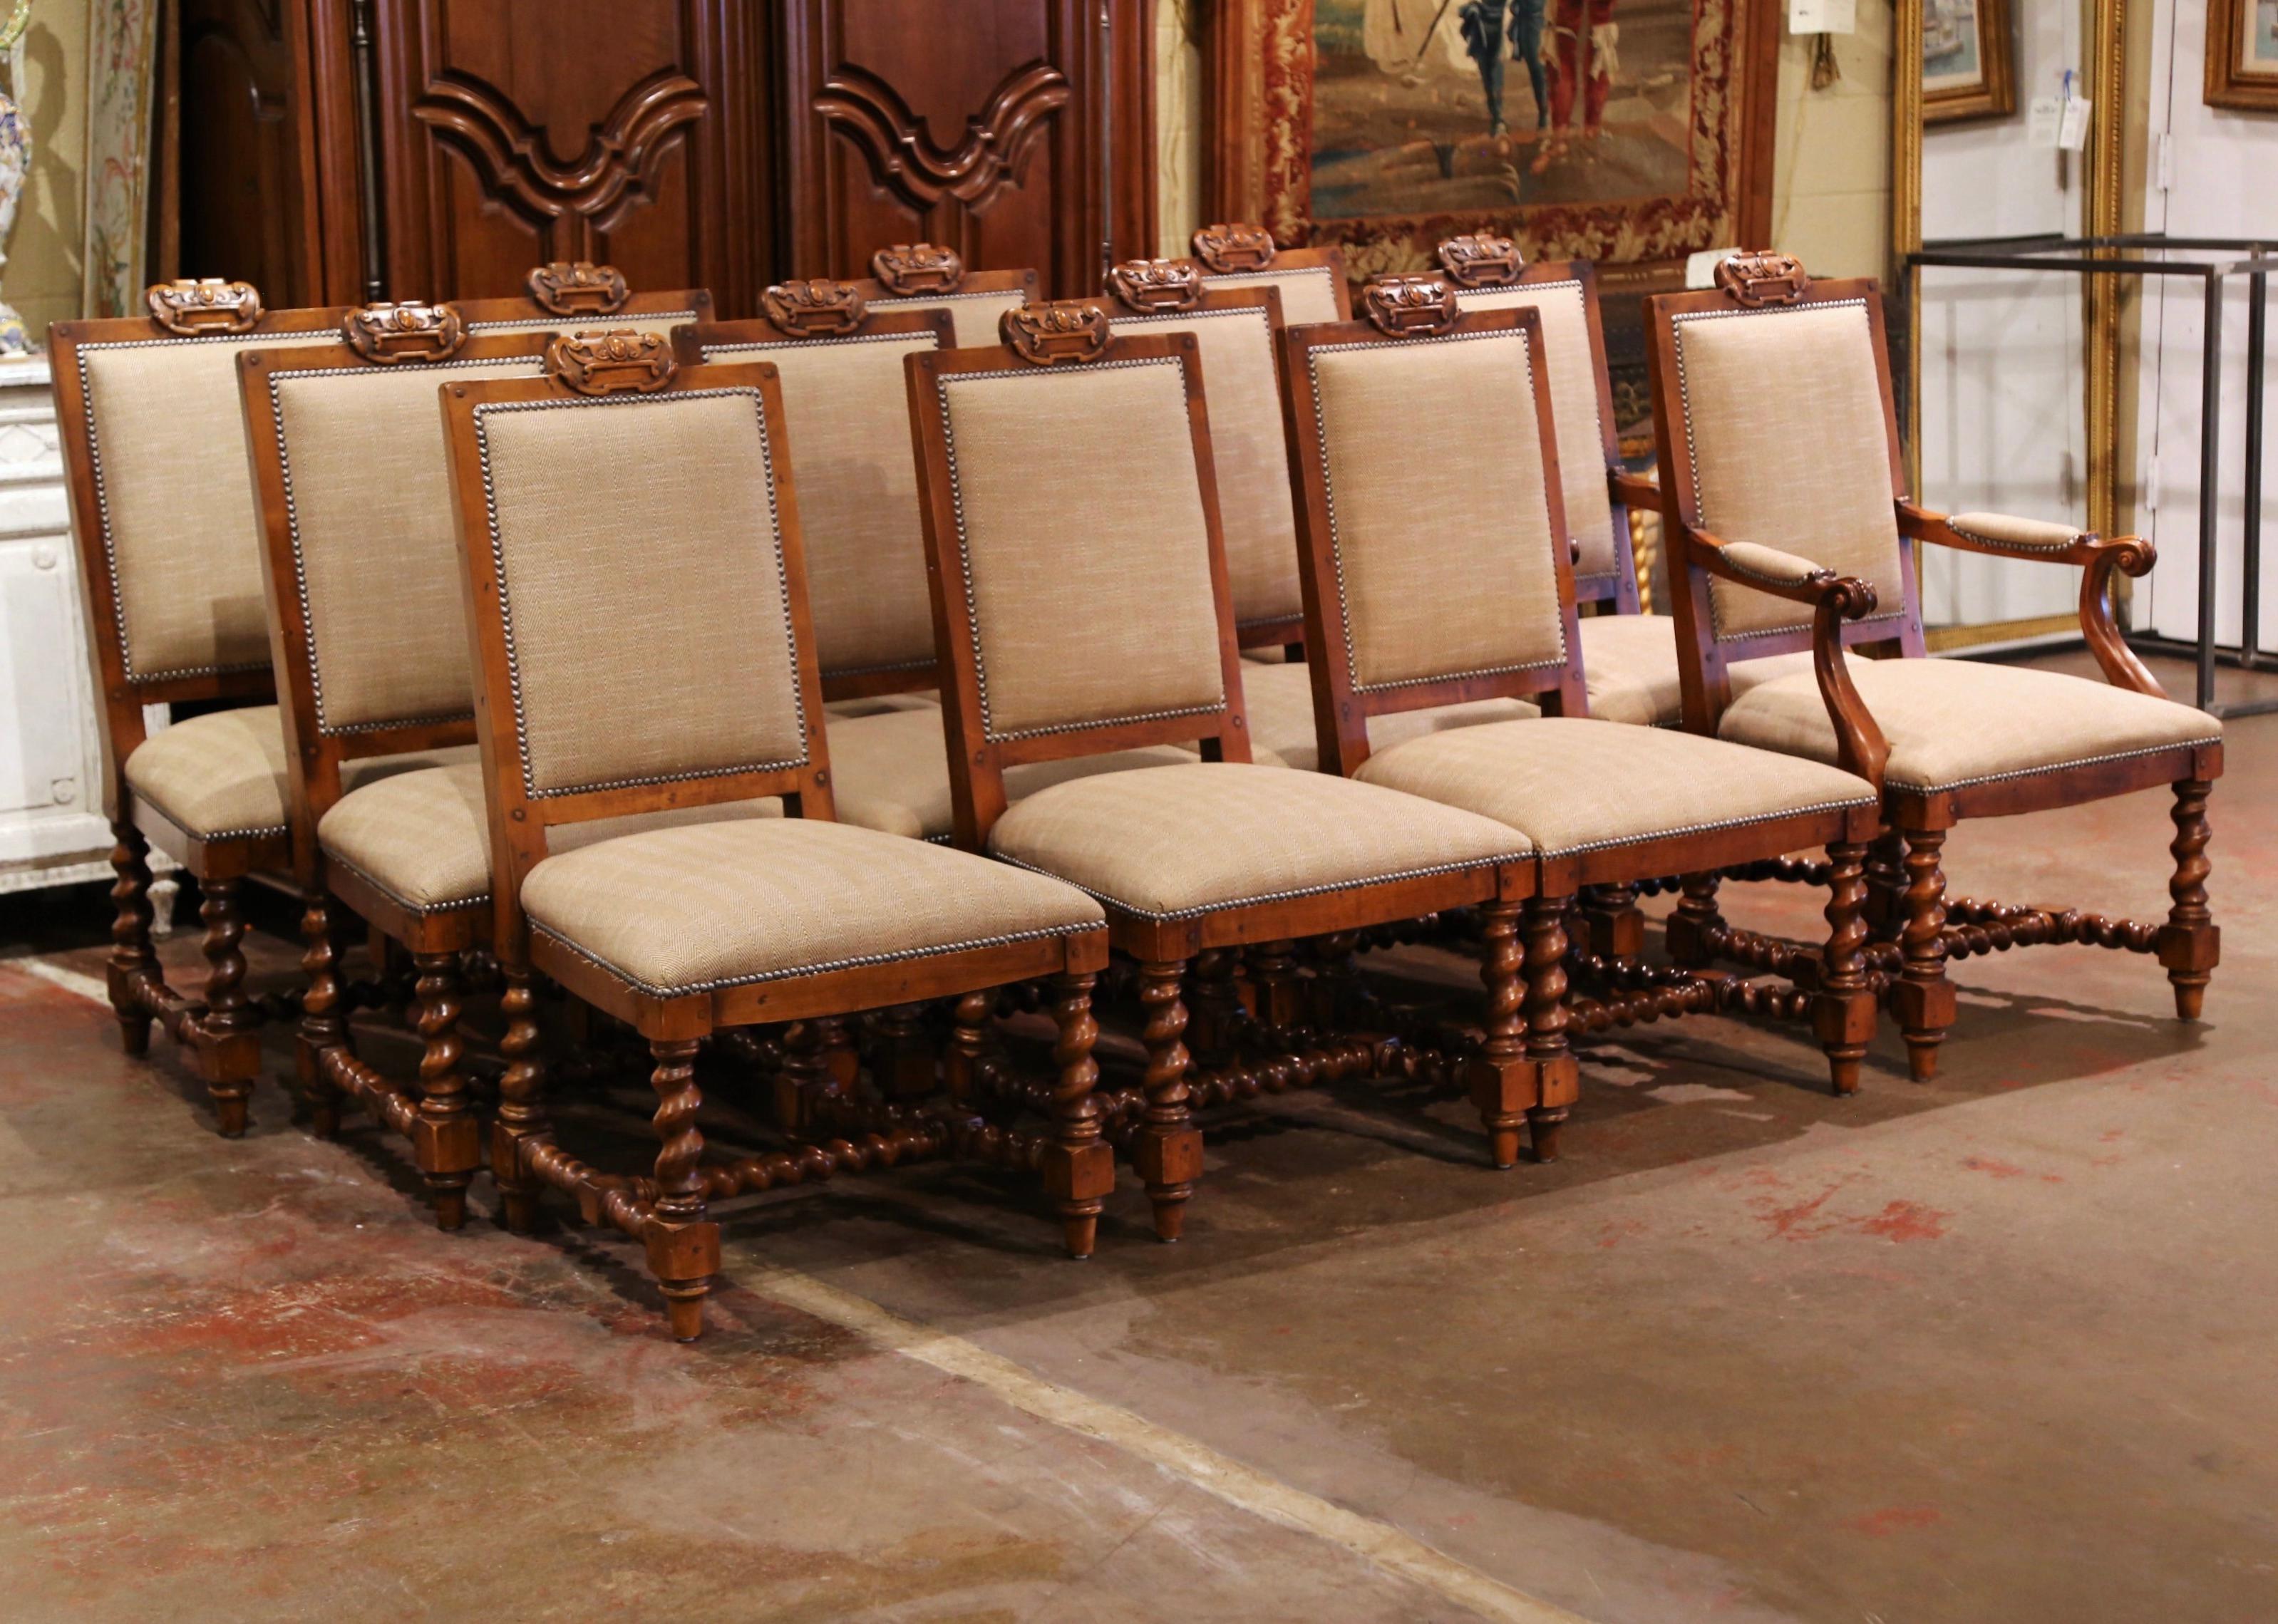 Dress a dining table with this elegant vintage set of 10 chairs and 2 matching armchairs. Crafted circa 1990 by Polo Ralph Lauren for Henredon Company, each large chair stands on barley twist legs ending with tapered feet, and embellished with a